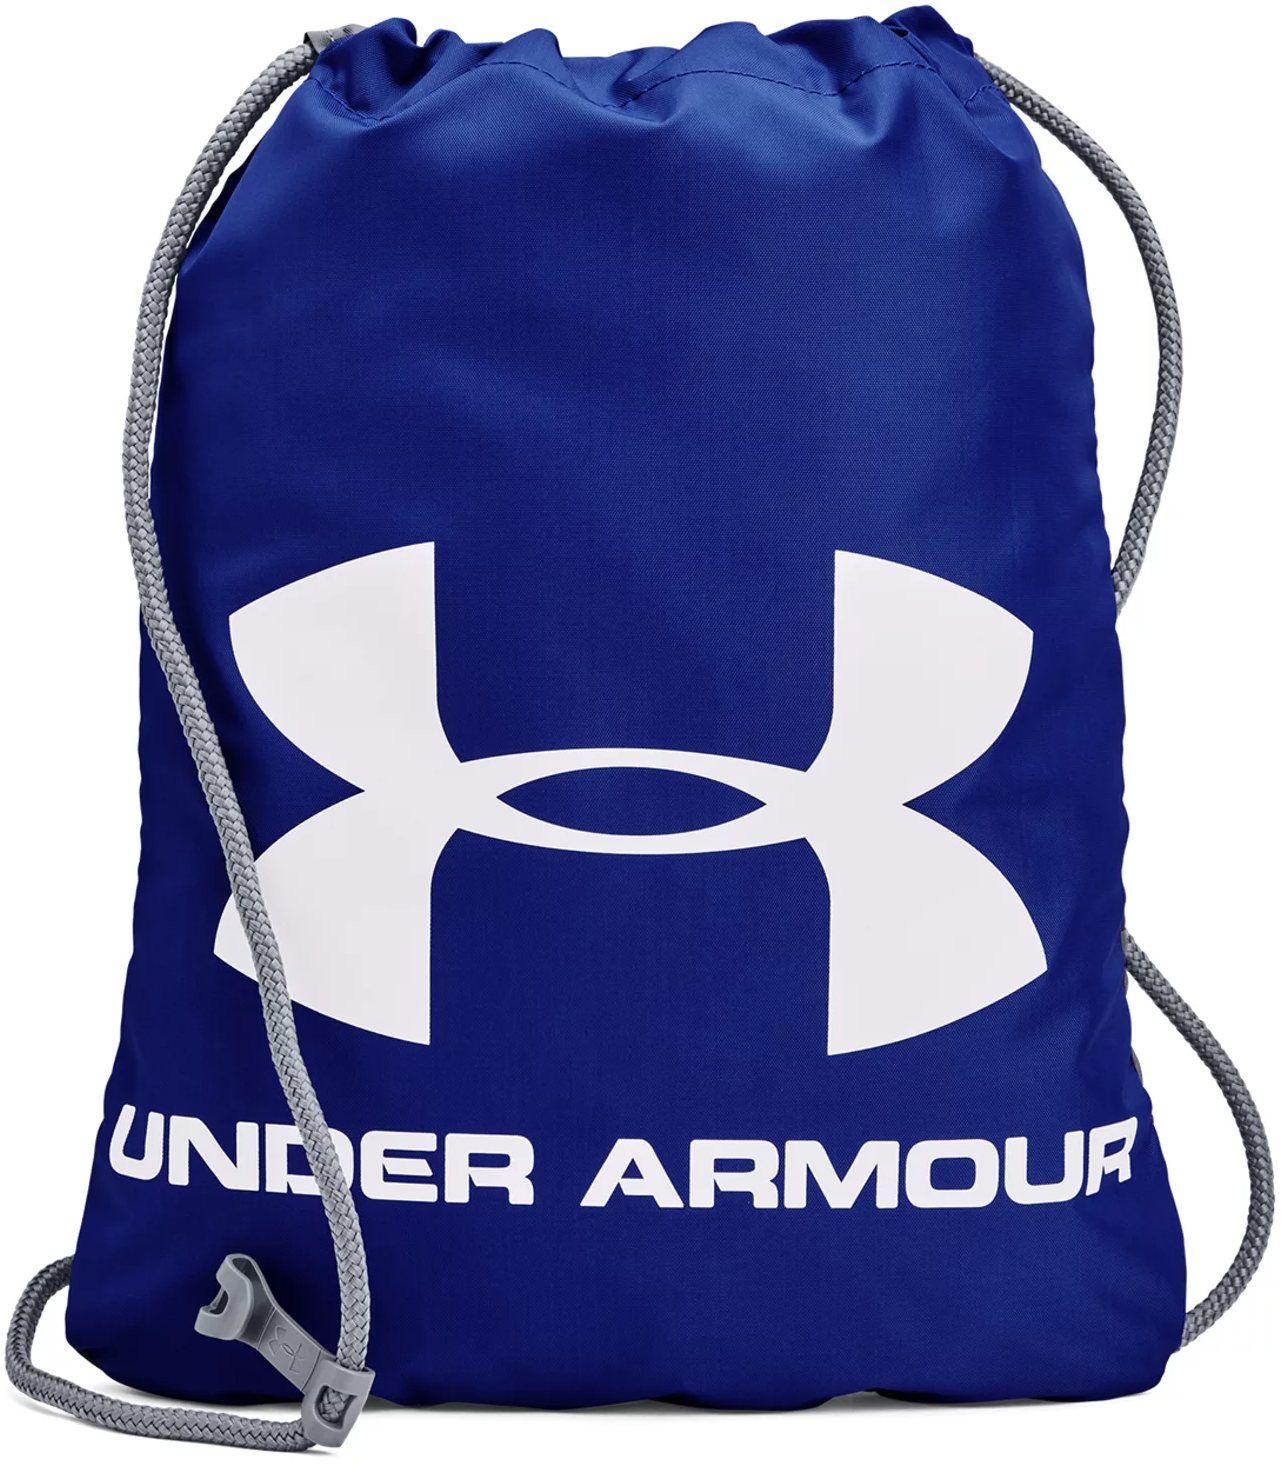 Under Armour Ozsee Sackpack-Tac Essentials